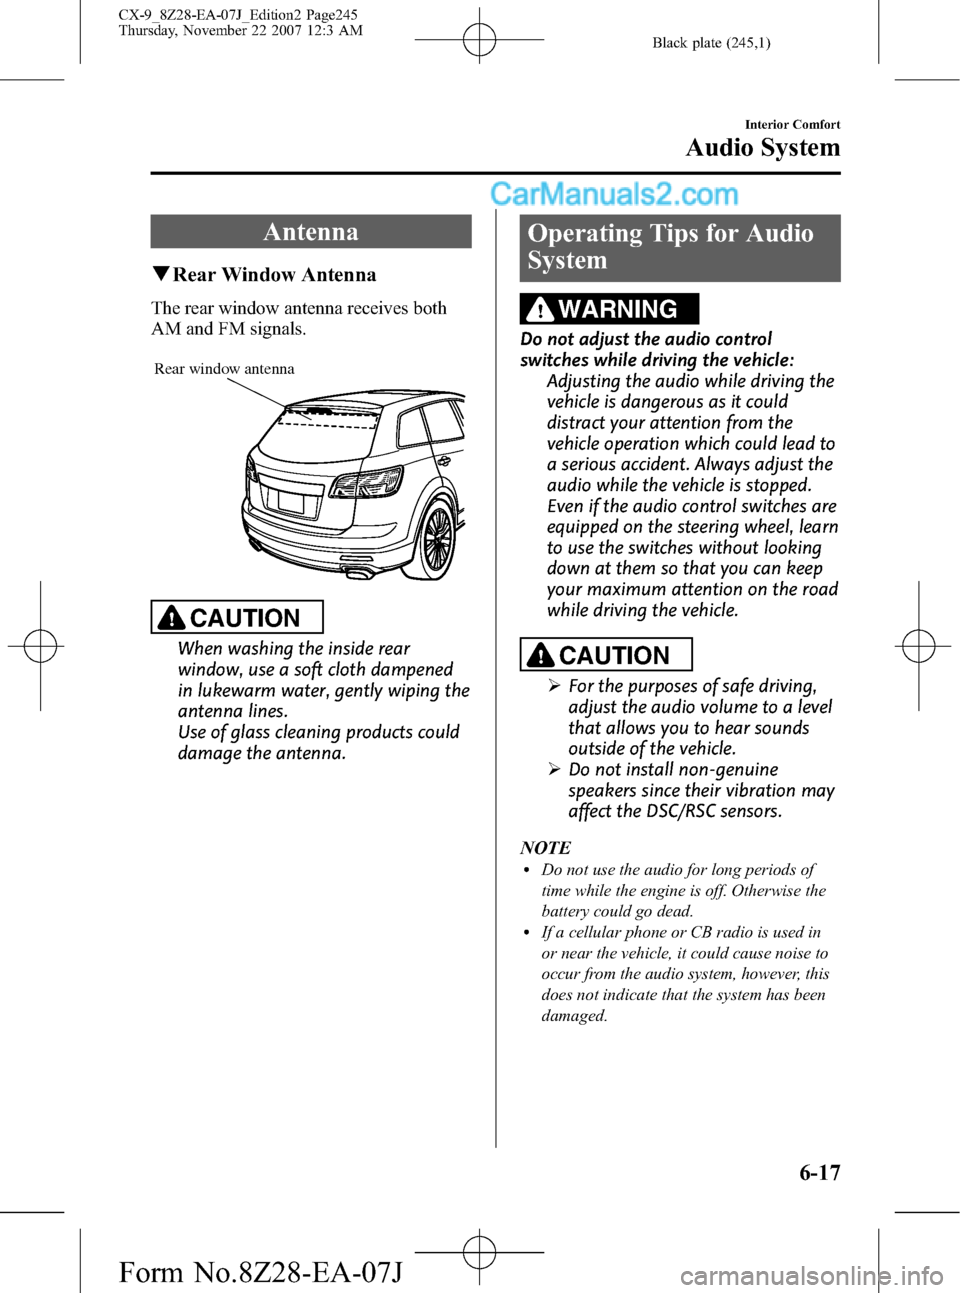 MAZDA MODEL CX-9 2008  Owners Manual (in English) Black plate (245,1)
Antenna
qRear Window Antenna
The rear window antenna receives both
AM and FM signals.
Rear window antenna
CAUTION
When washing the inside rear
window, use a soft cloth dampened
in 